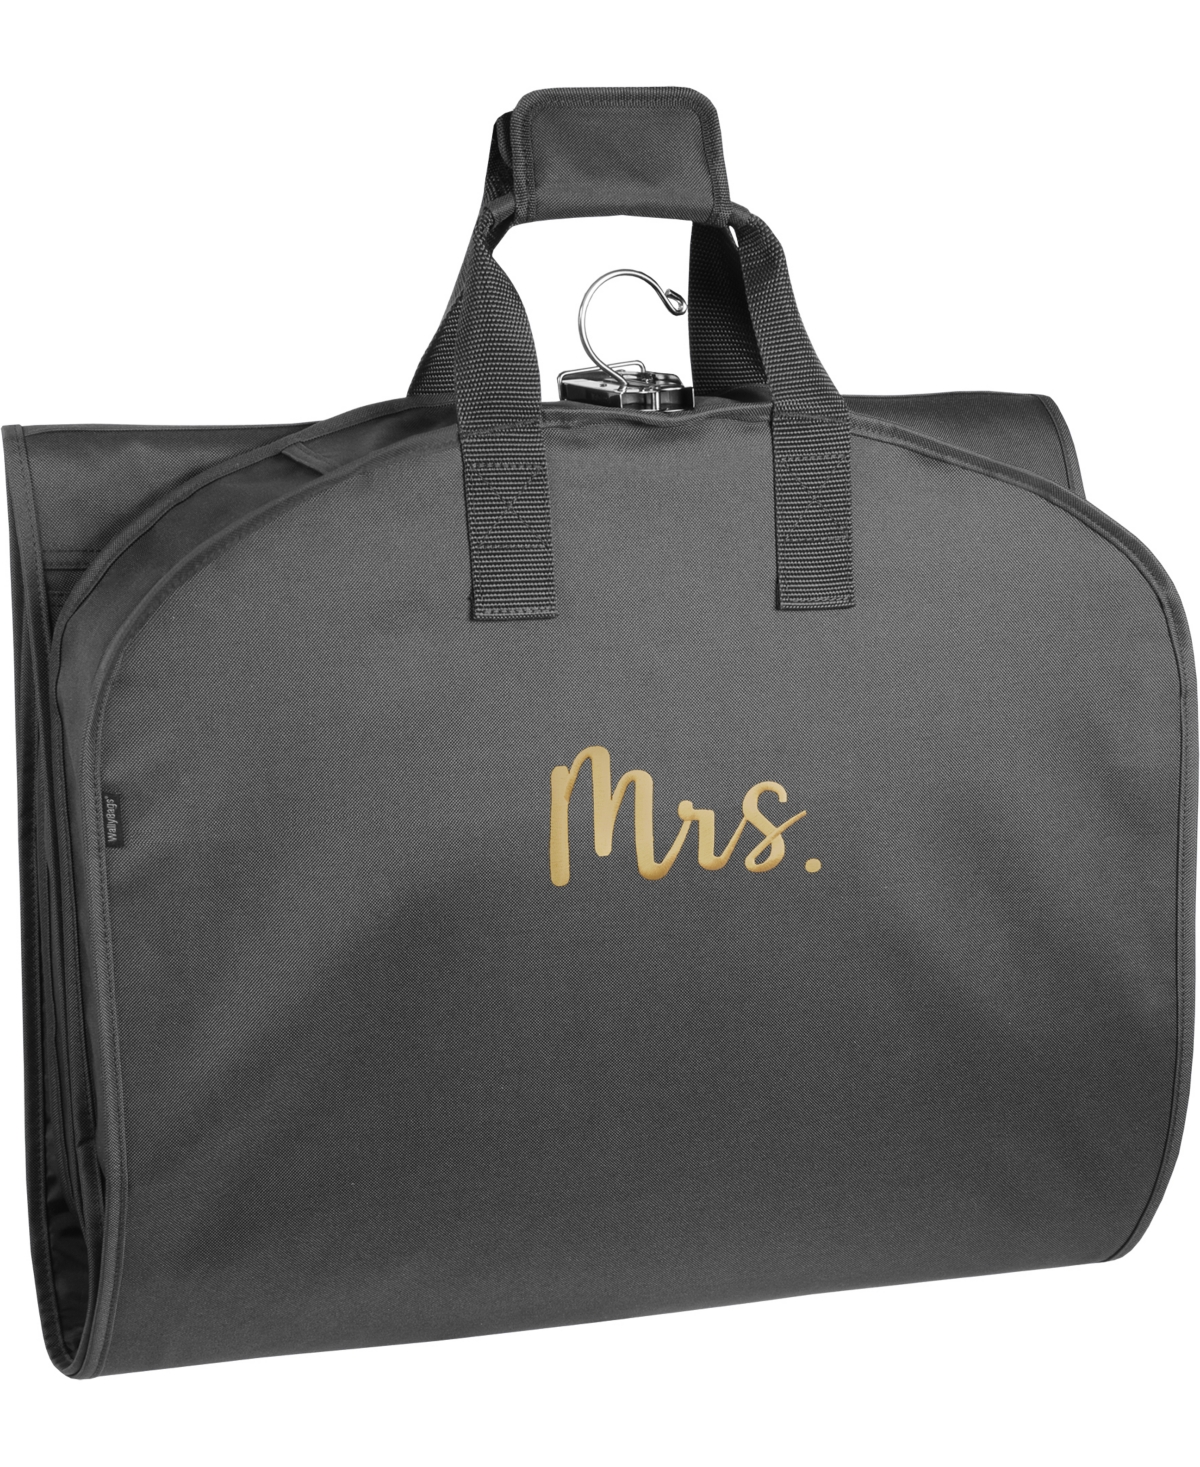 Wallybags 60" Premium Tri-fold Travel Garment Bag With Pocket And Mrs. Embroidery In Black - M Gold